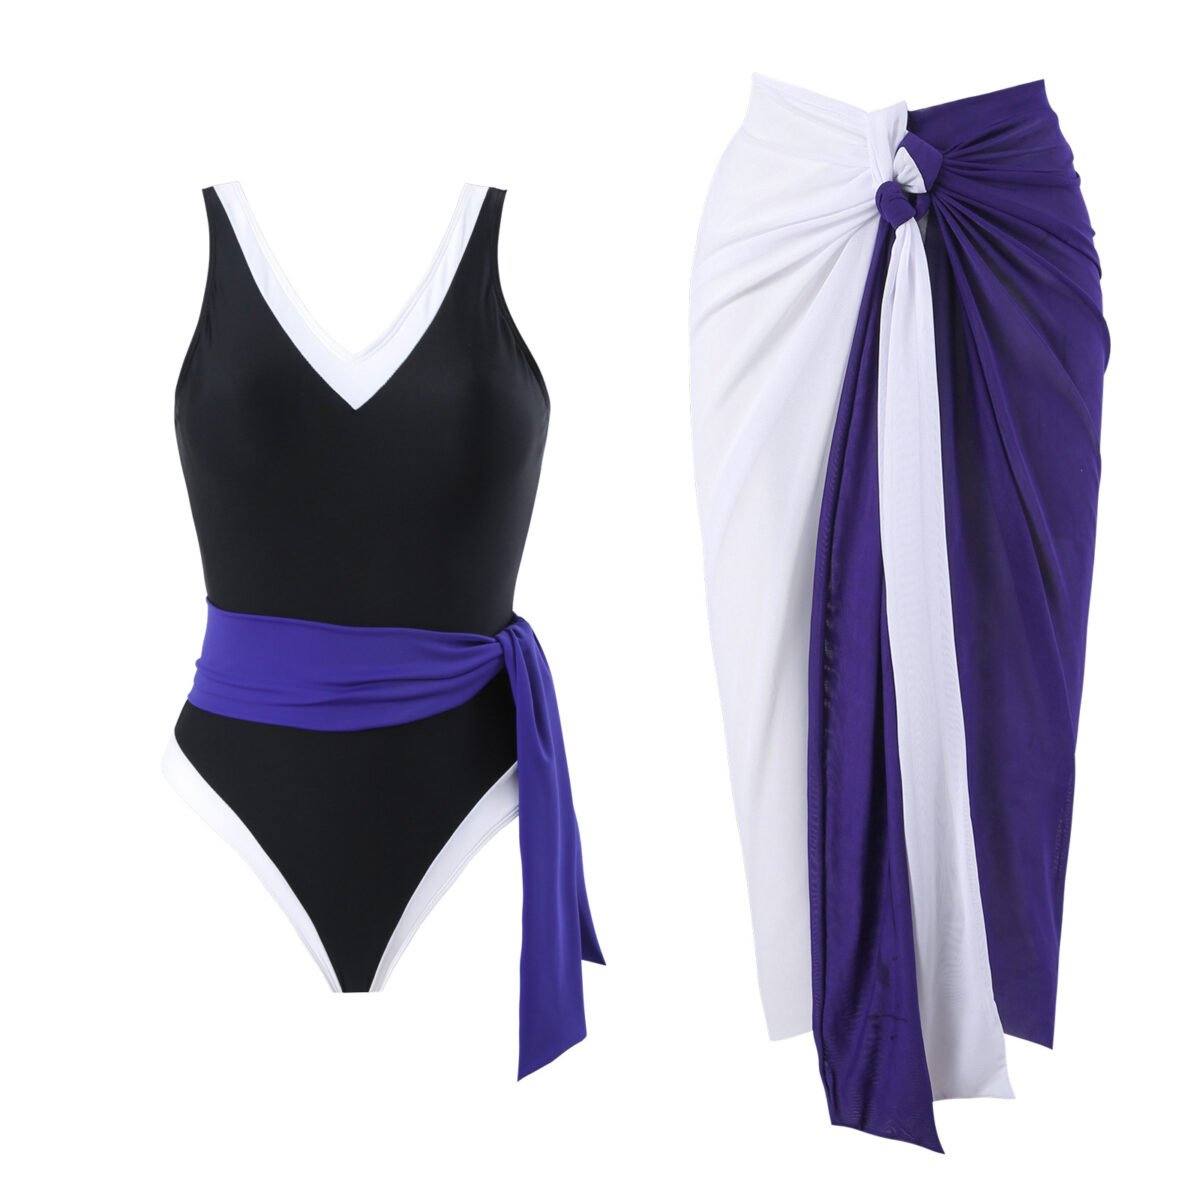 Women's Sexy Backless Solid Color Swimsuit W/ Chiffon Skirt Set